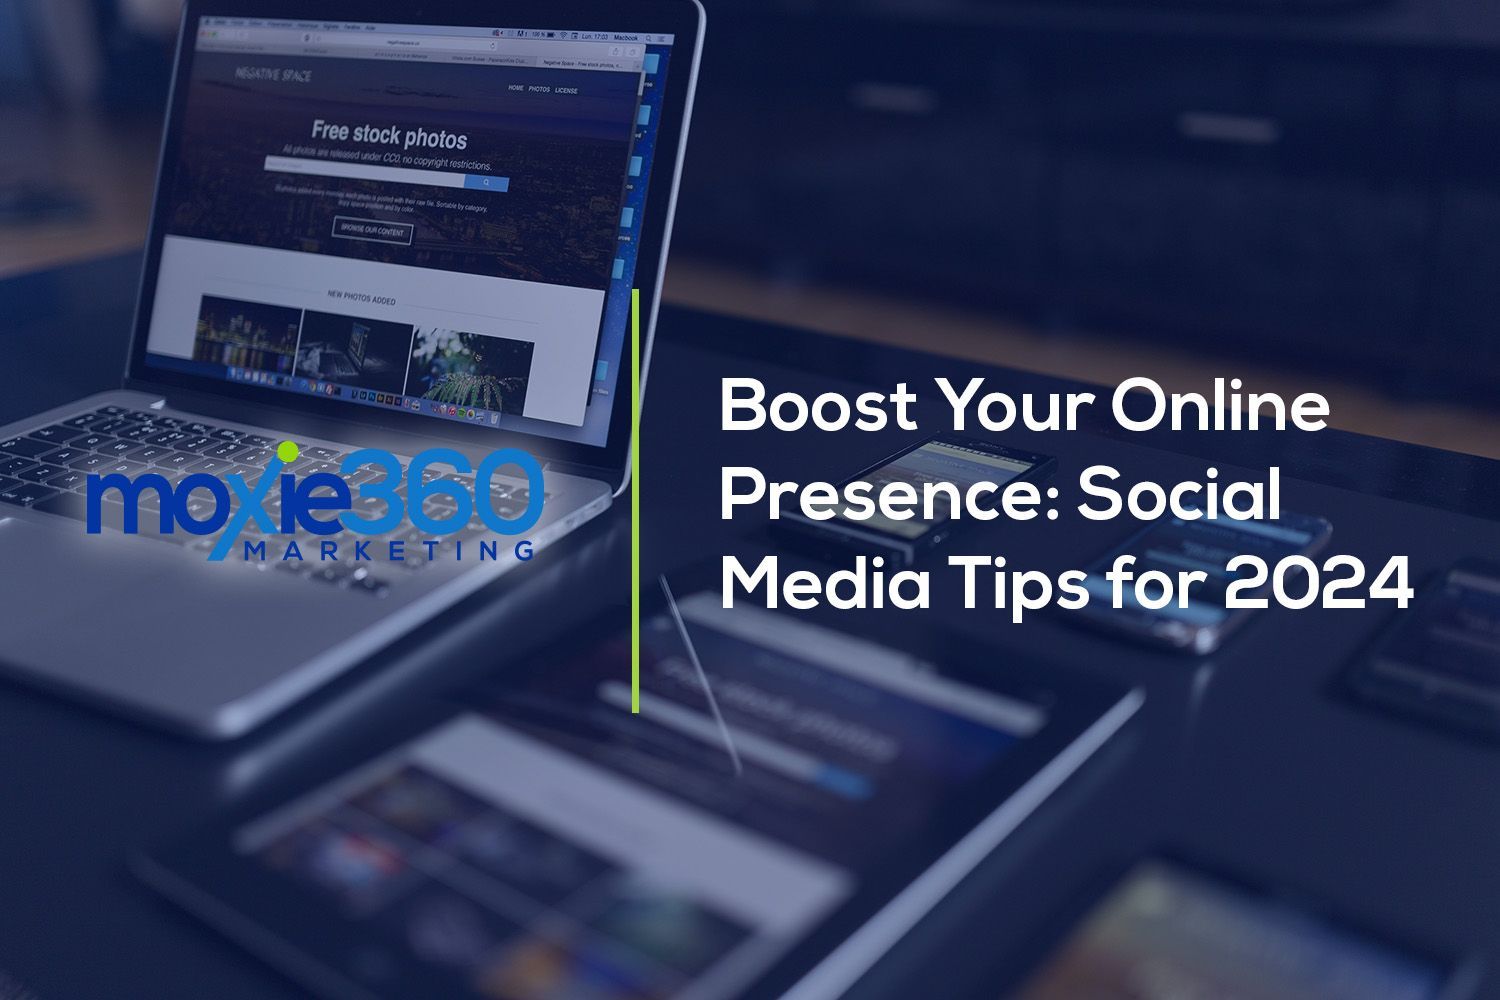 Boost Your Online Presence: Social Media Tips for 2024 | Moxie360 Marketing